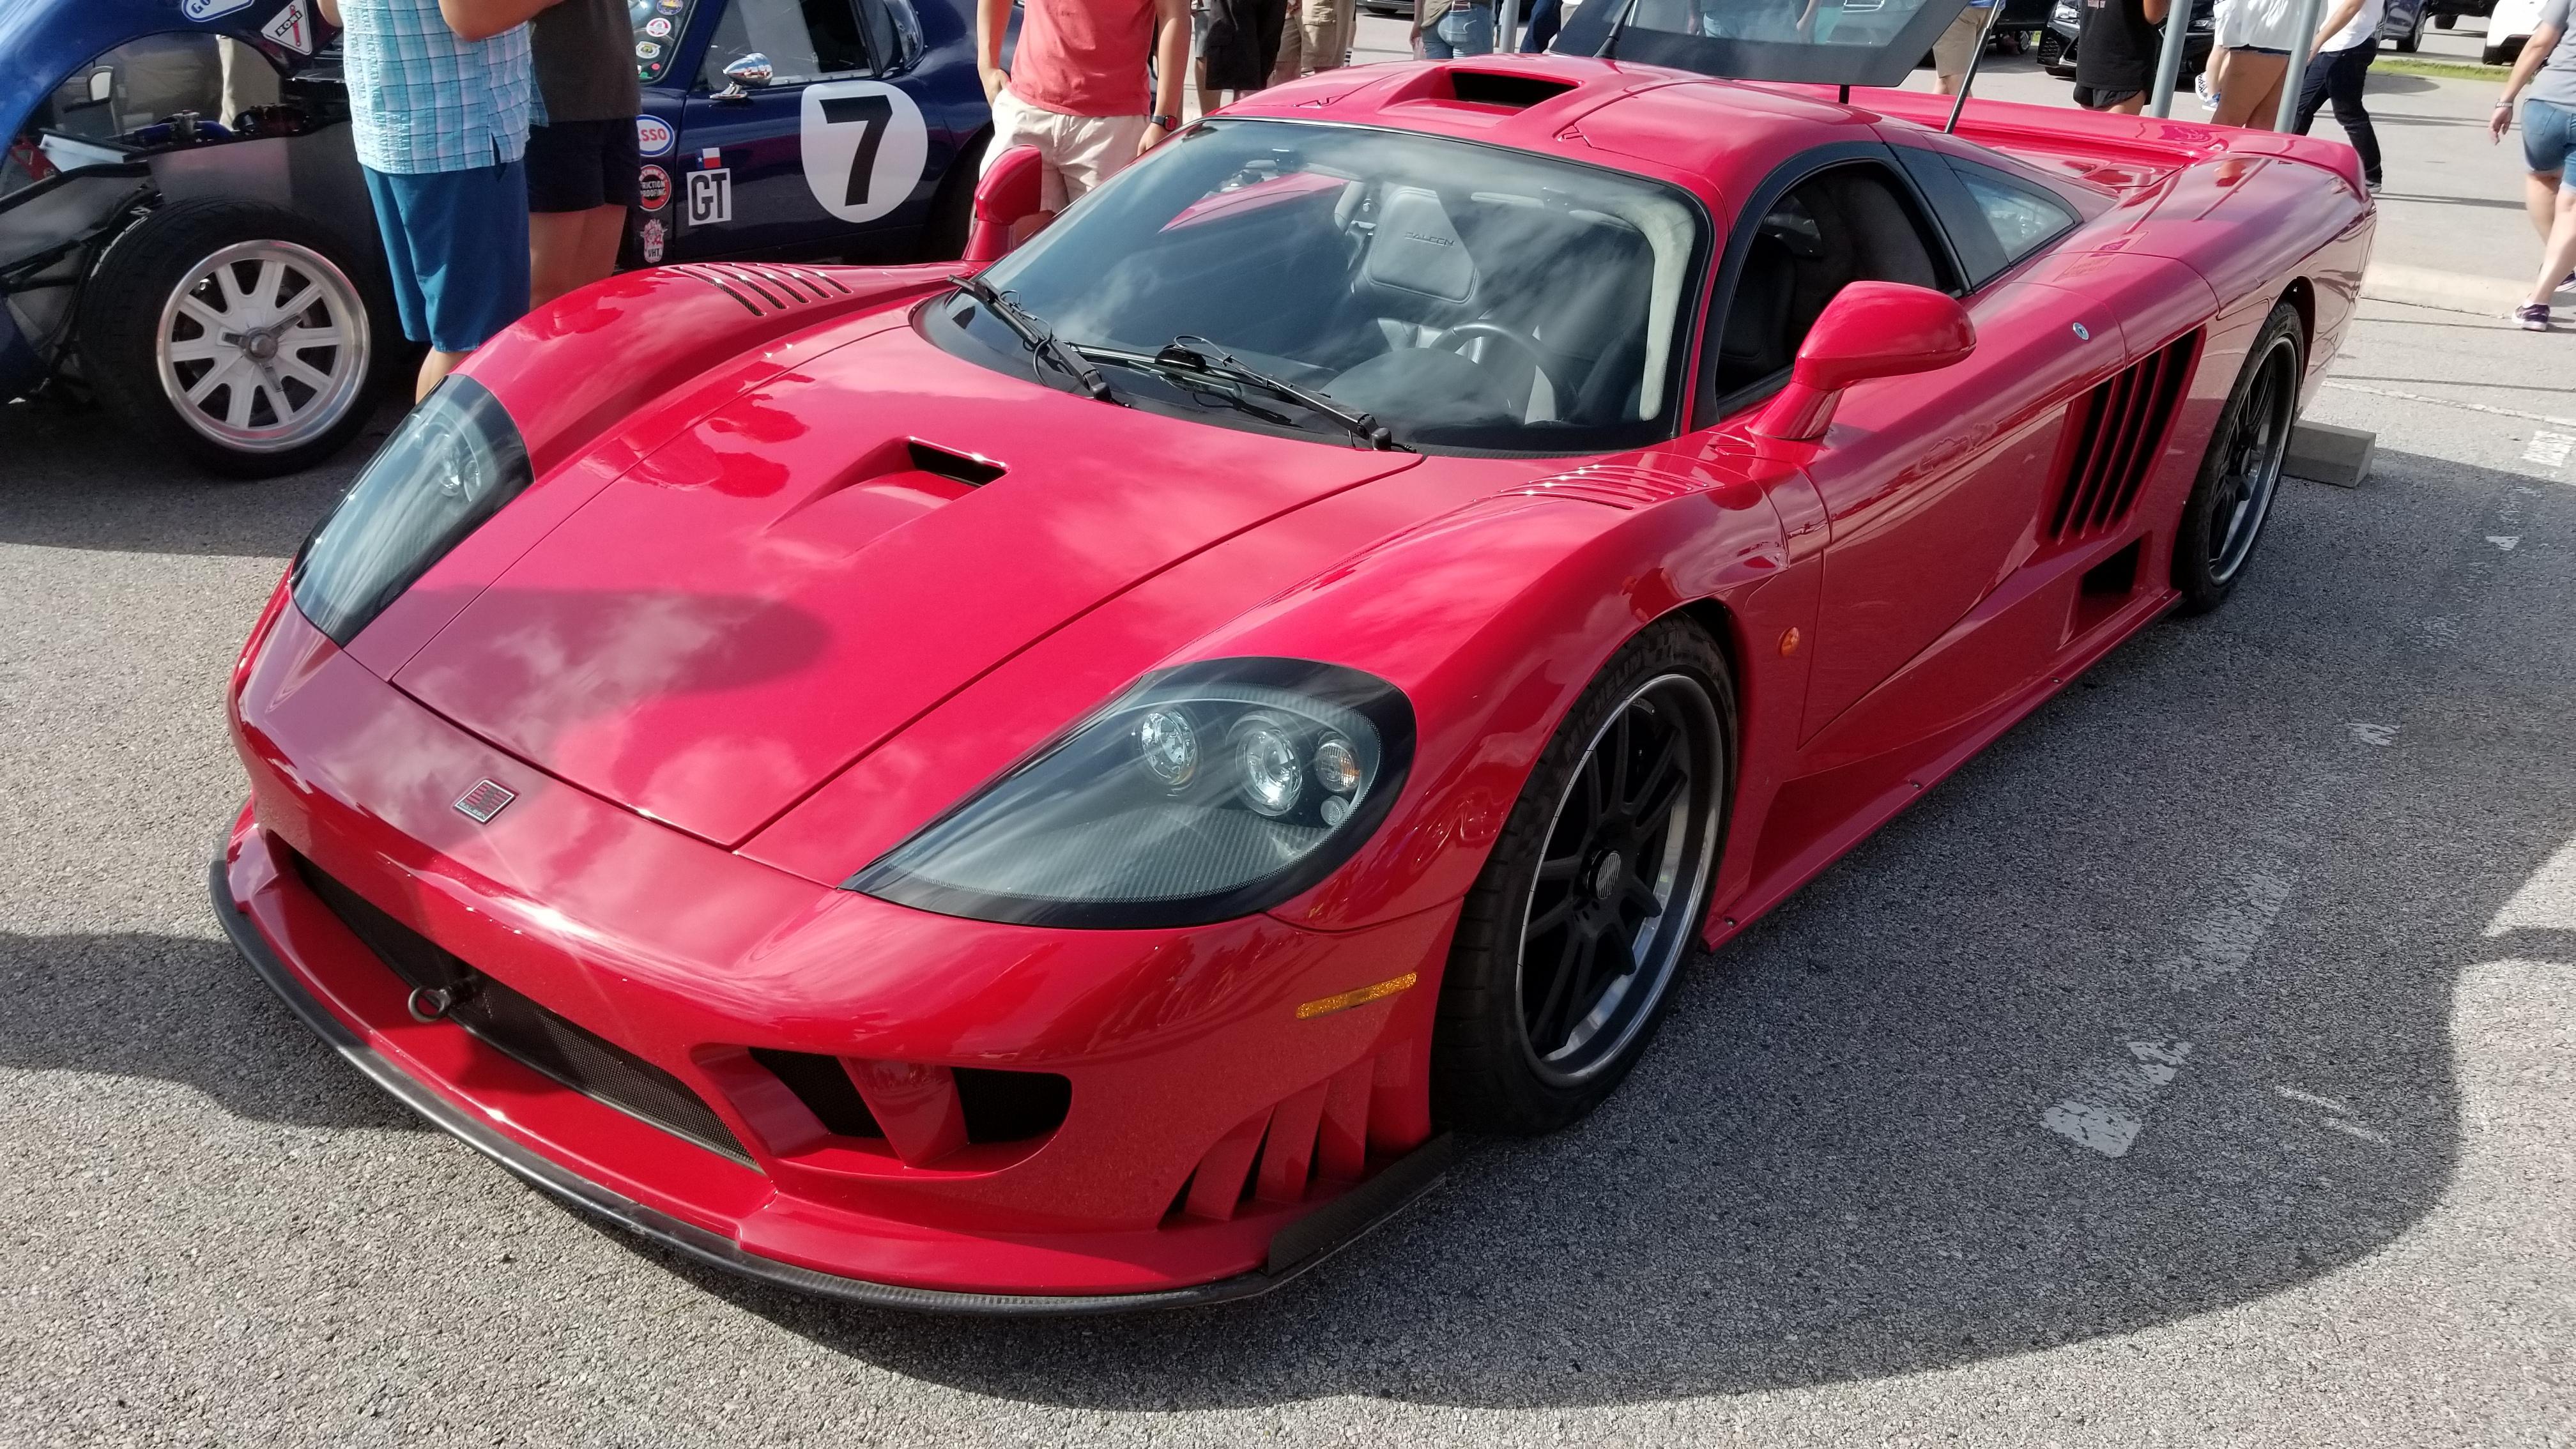 Saleen S7 Logo - Saleen S7 at the last Austin Cars and Coffee